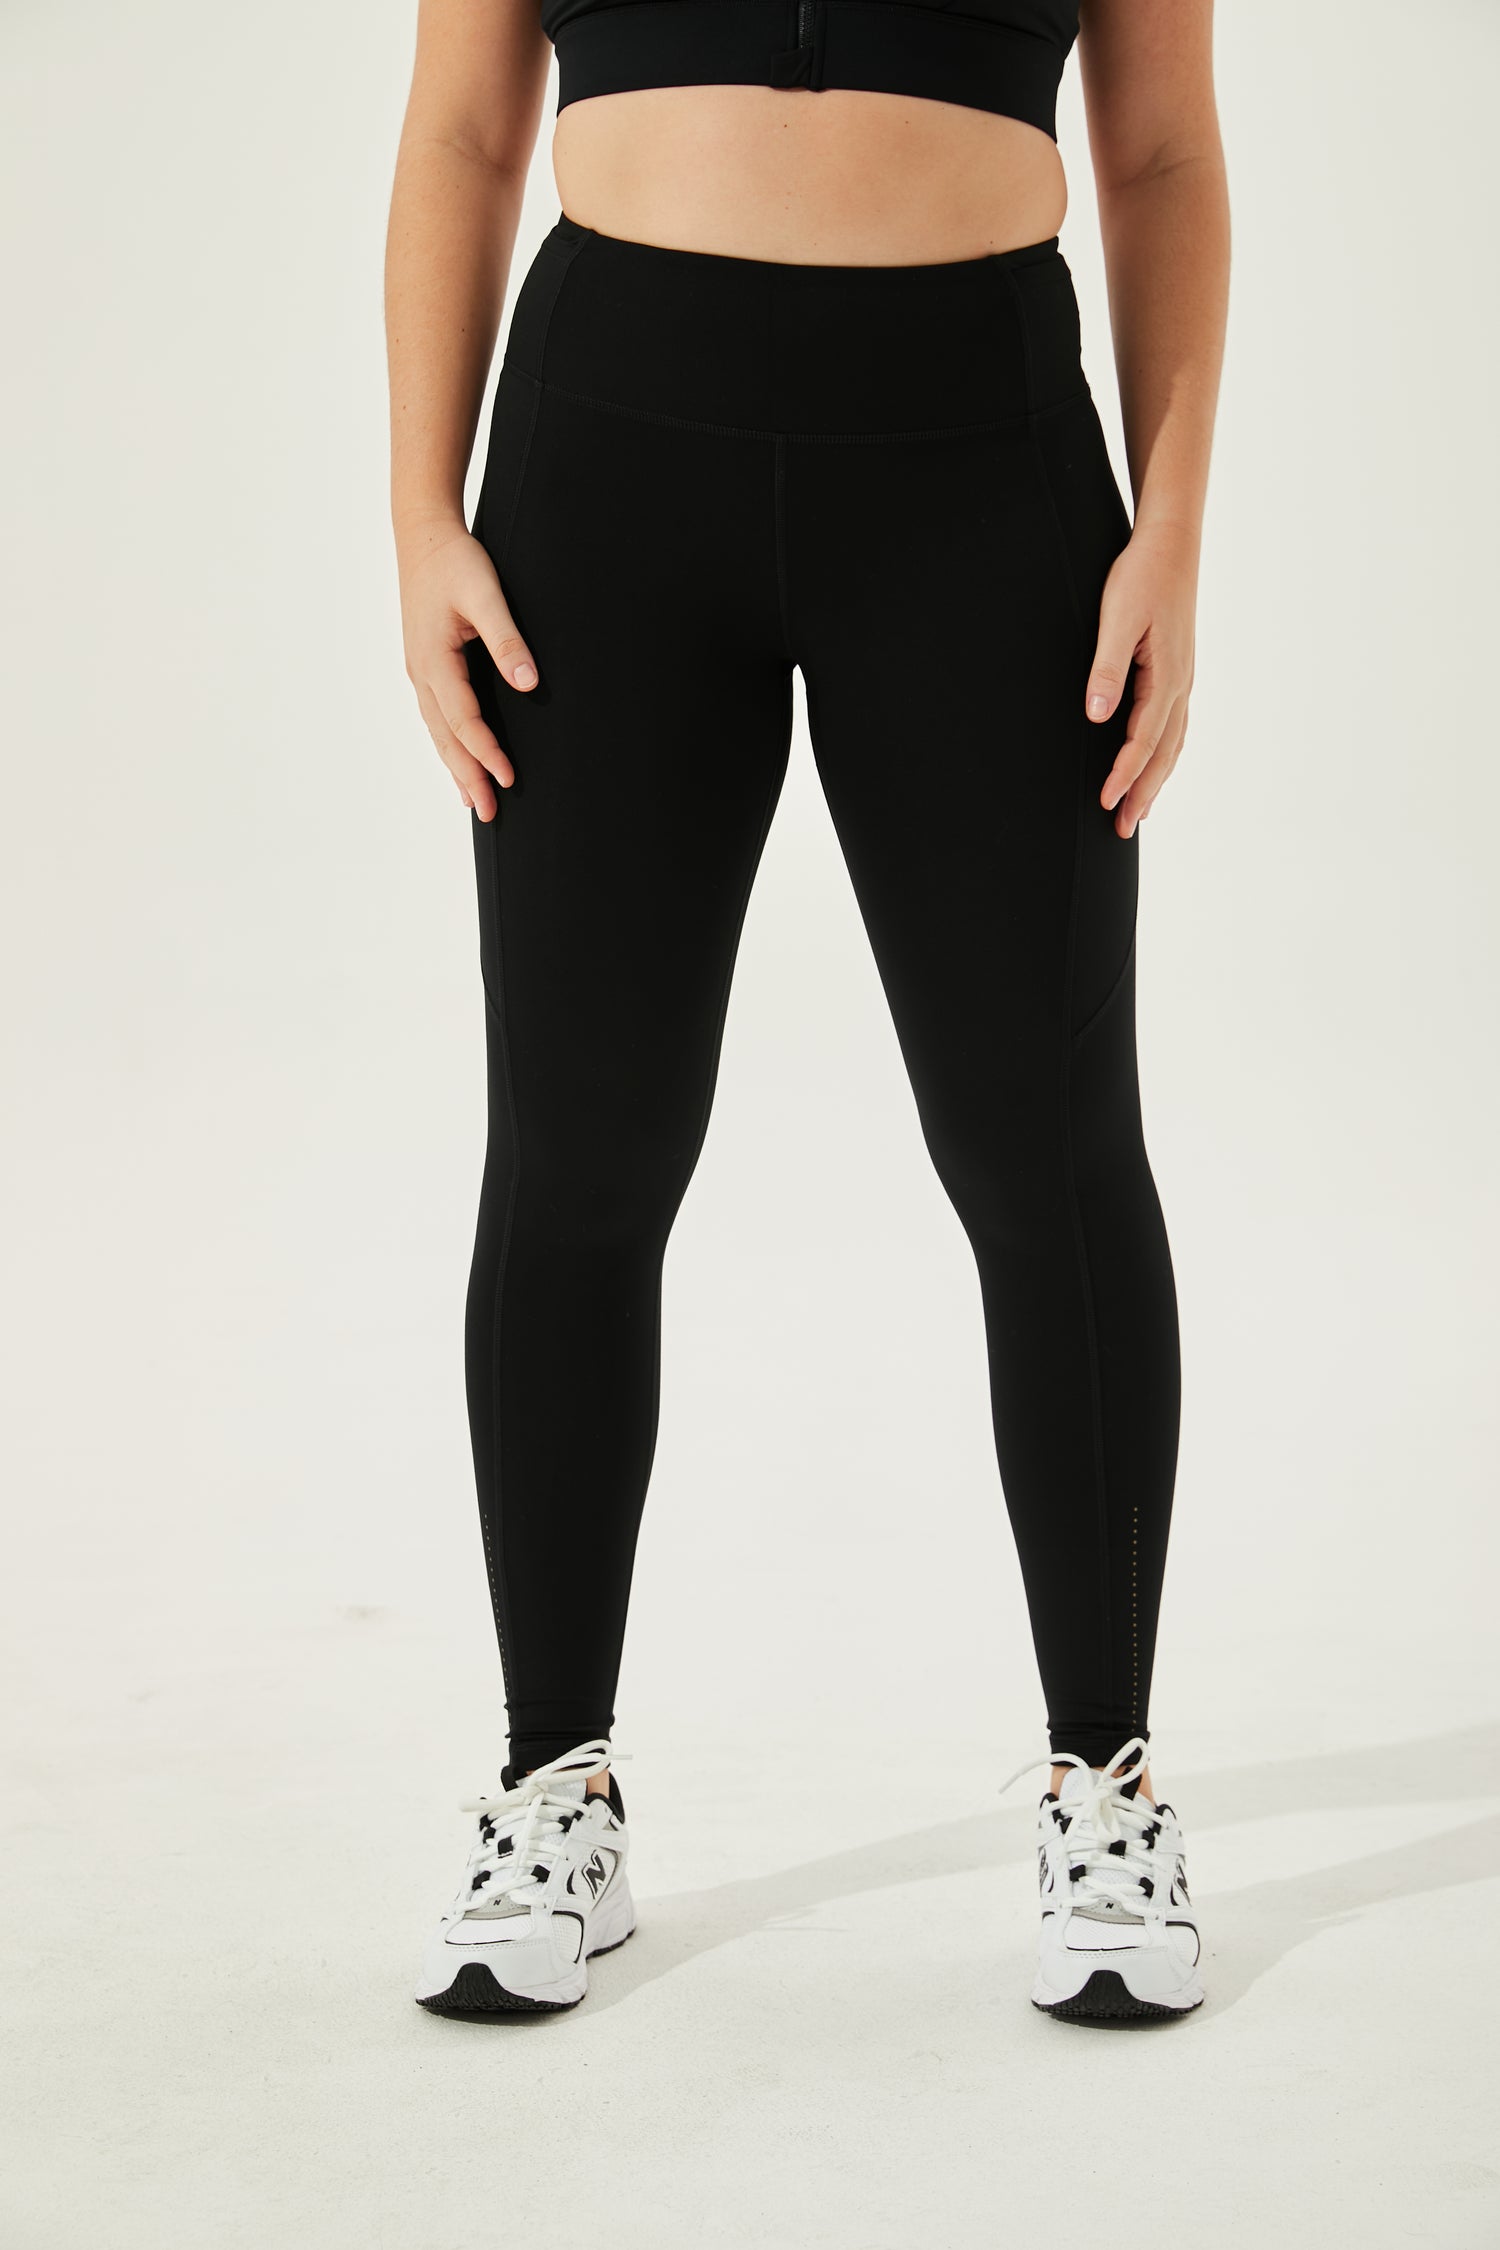 High Waist Naked Feel No Camel Toe Sport Leggings For Women Squatproof Best  Yoga Leggings 2022 For Fitness, Gym, And Athletic Activities Plus Size  Available H1221 From Mengyang10, $18.27